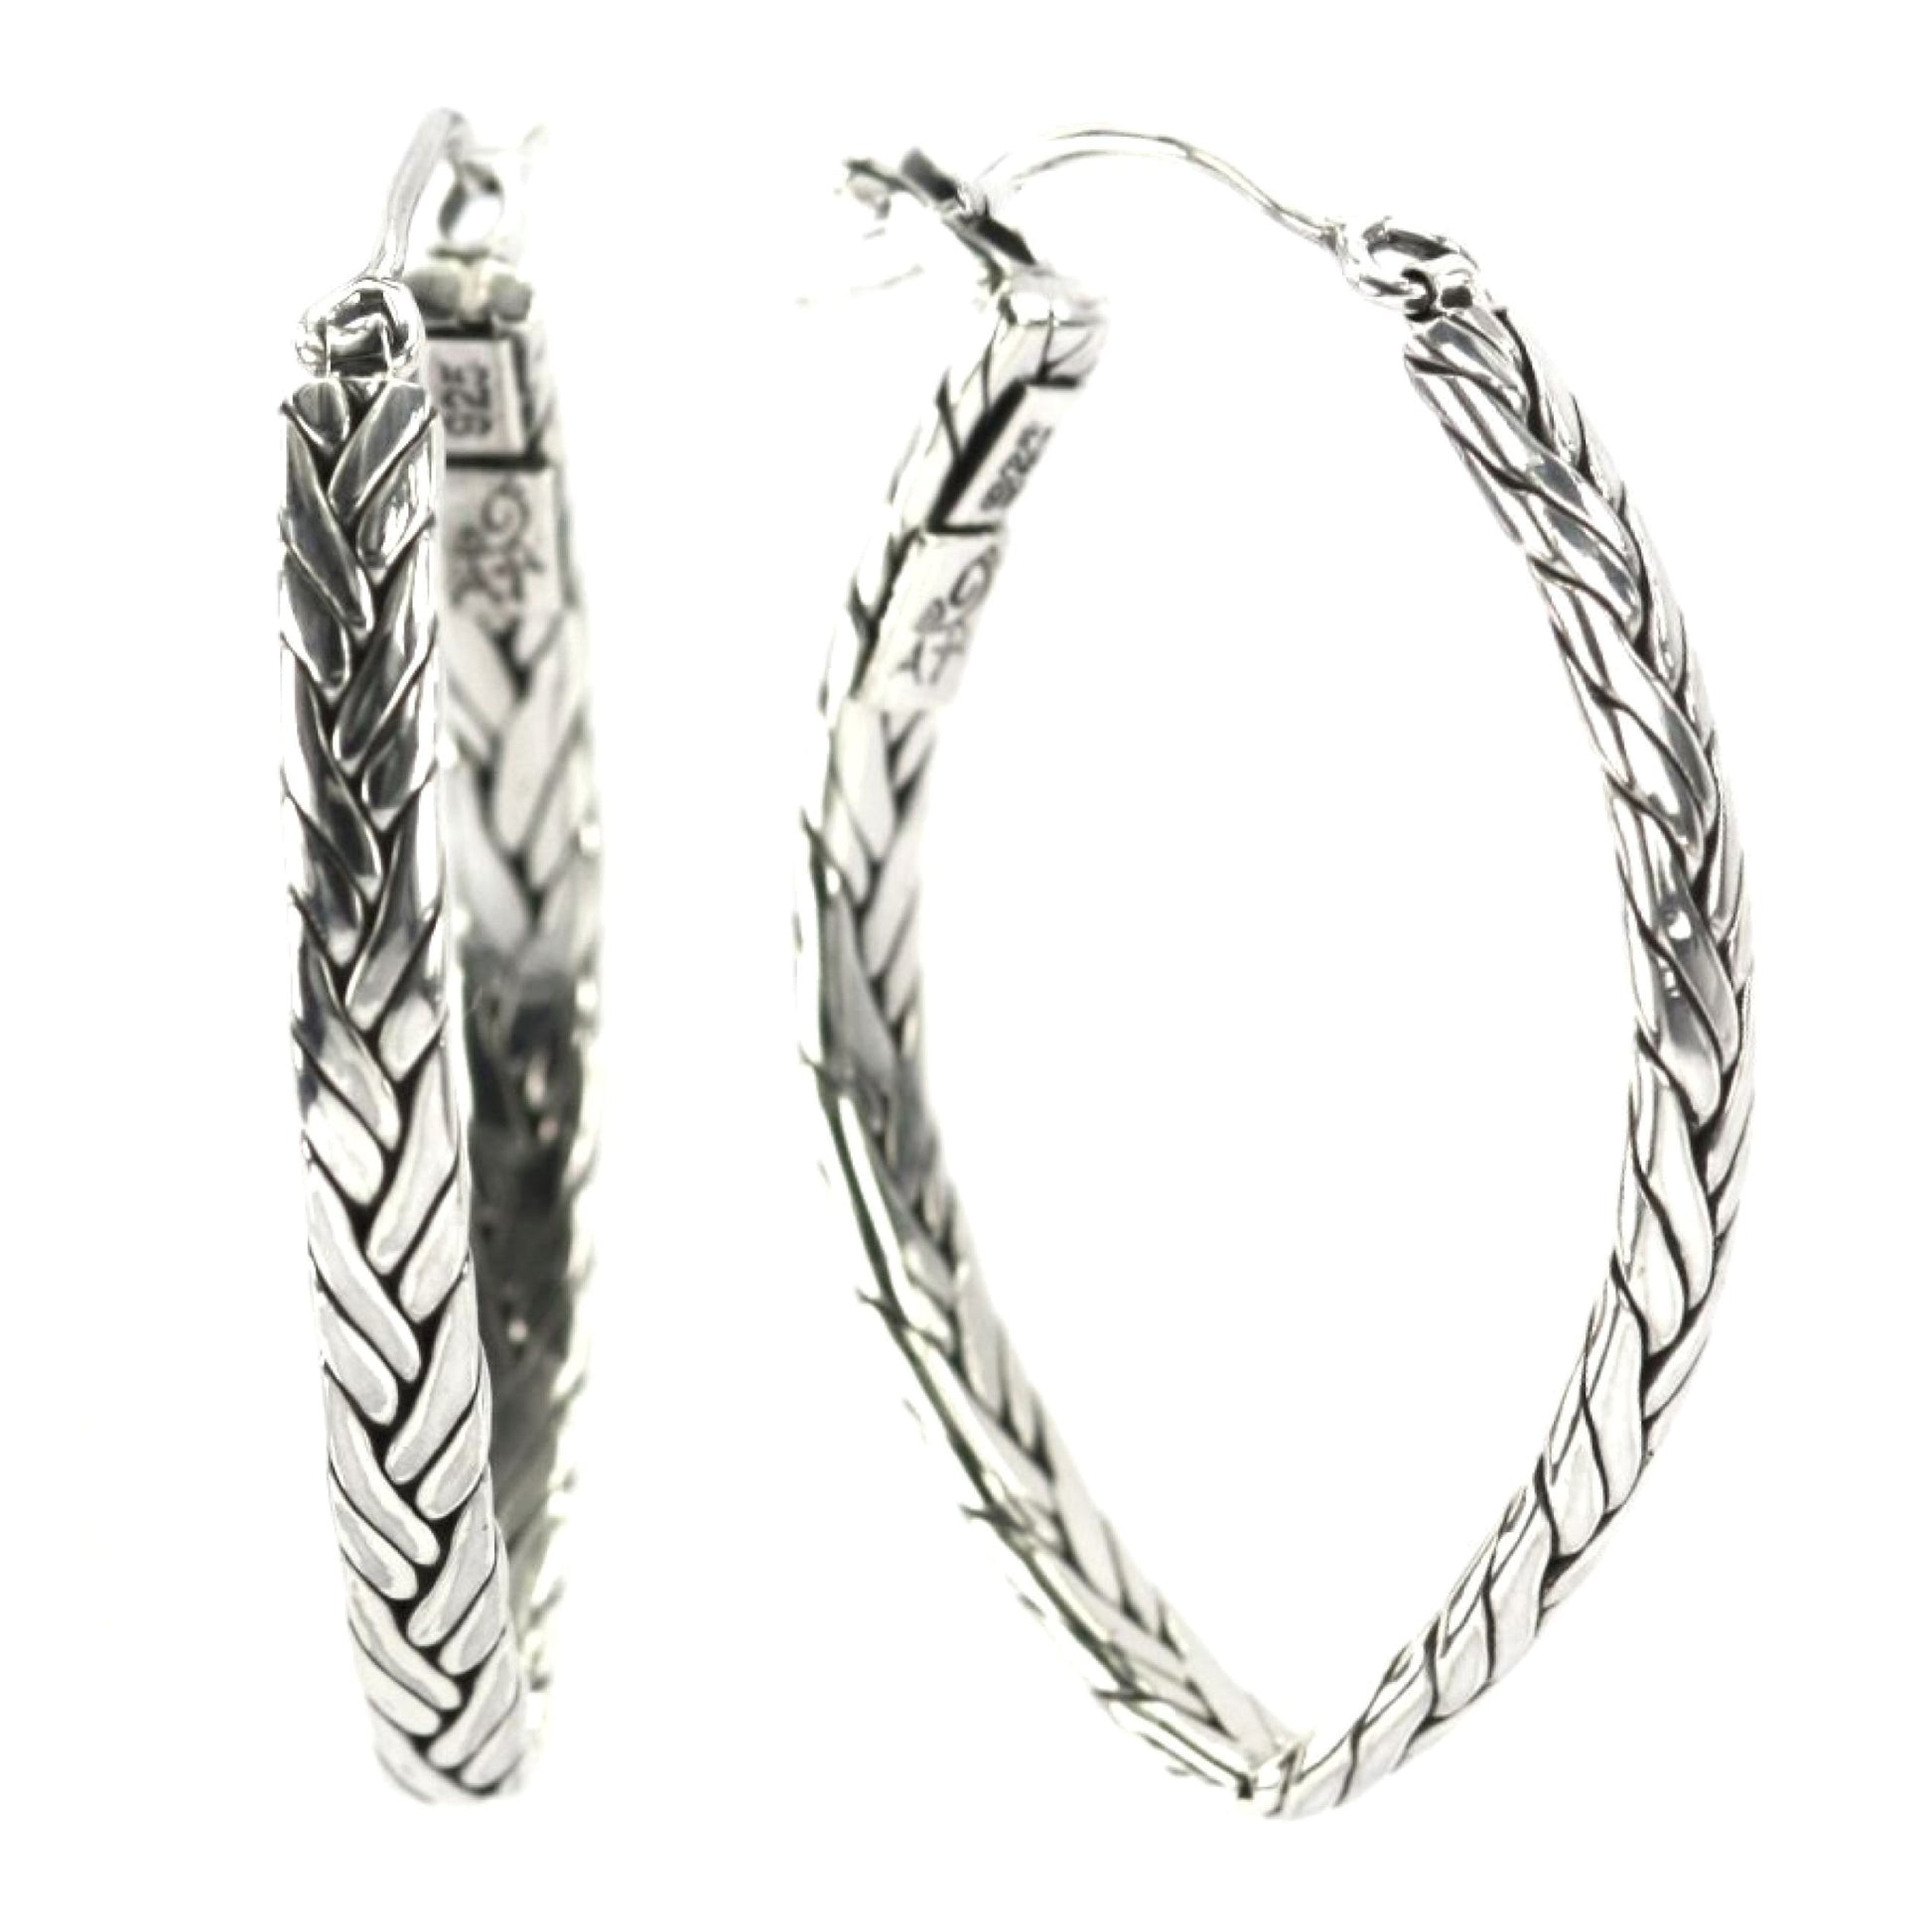 Silver earrings with V shape and woven strands.